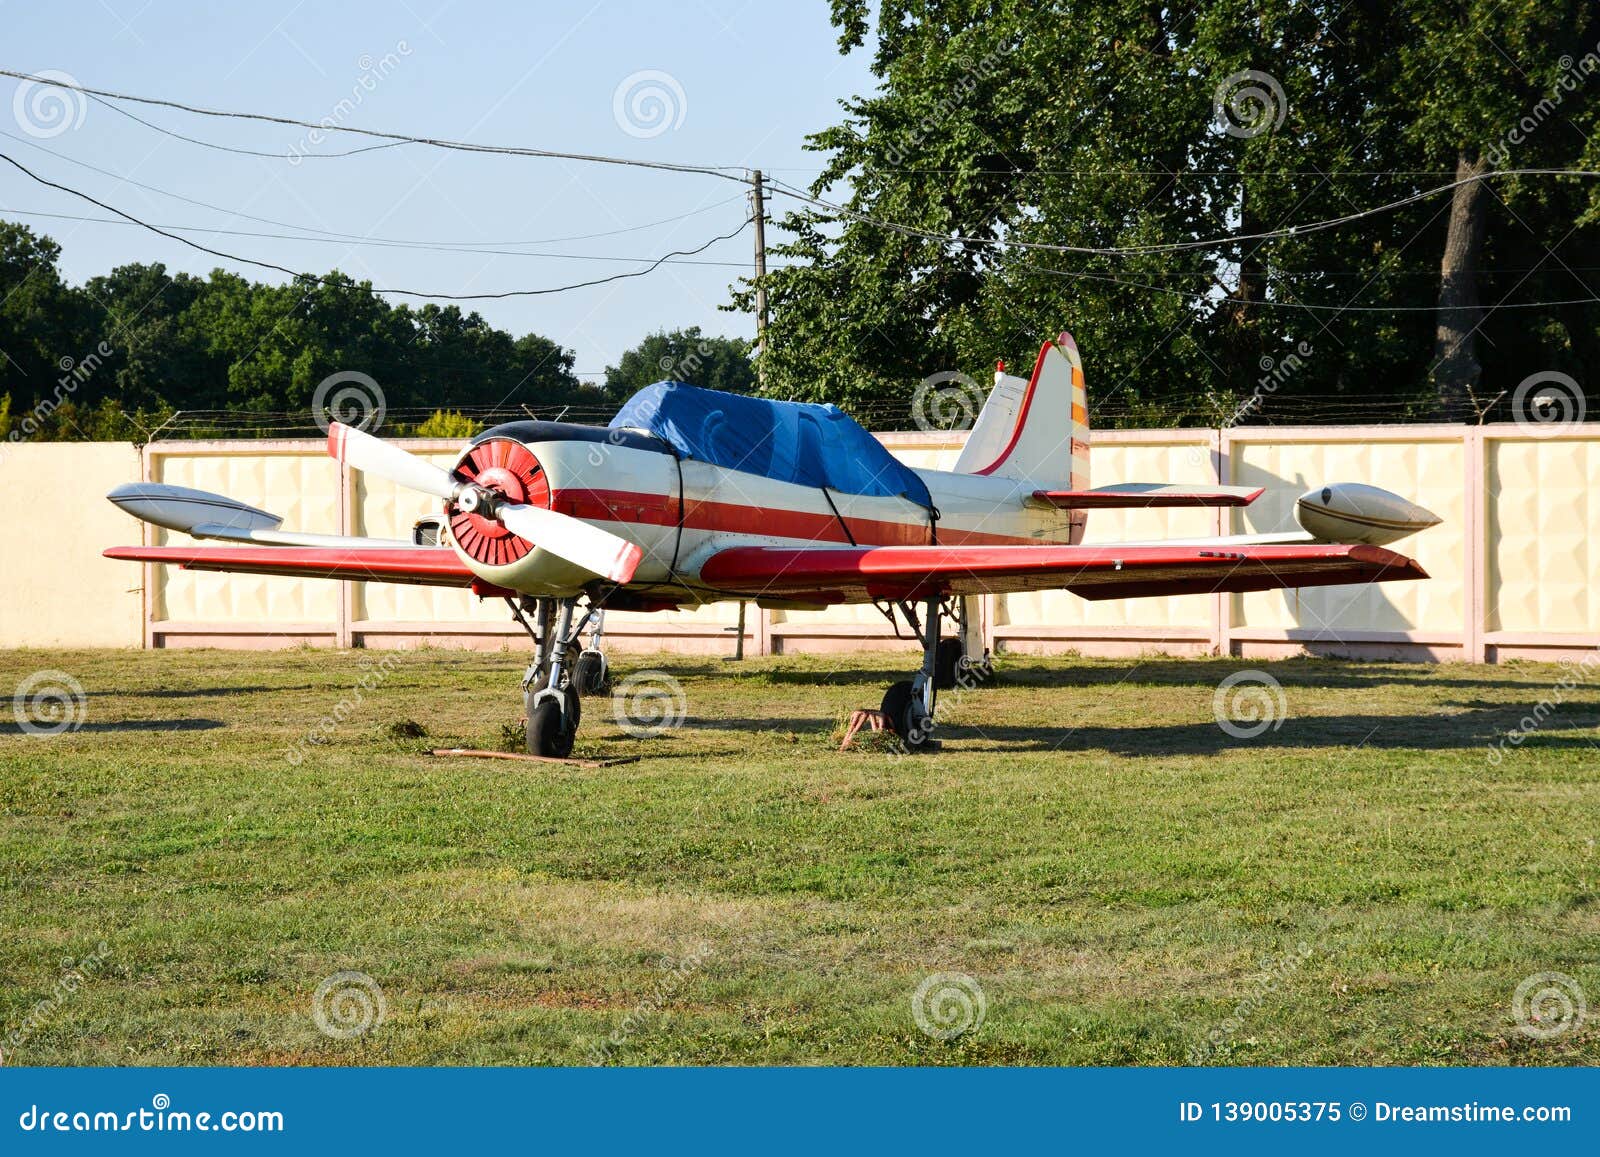 Small Plane On The Runway, Airplane Barn Stock Image 